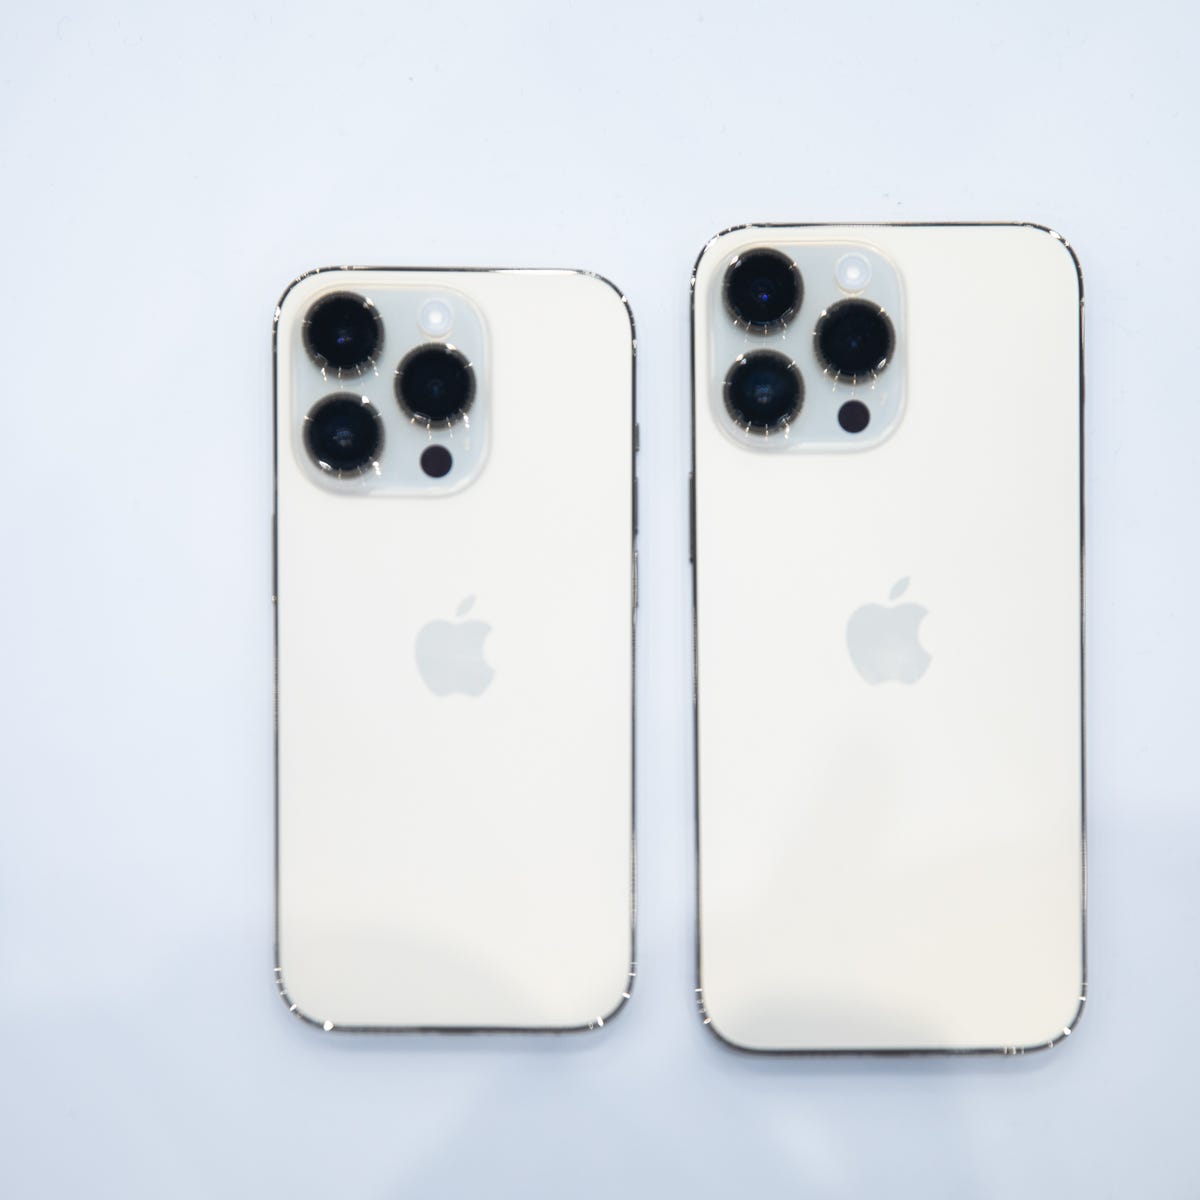 iPhone 14, 14 Plus Preorders 'Worse' Than For iPhone 13 Mini